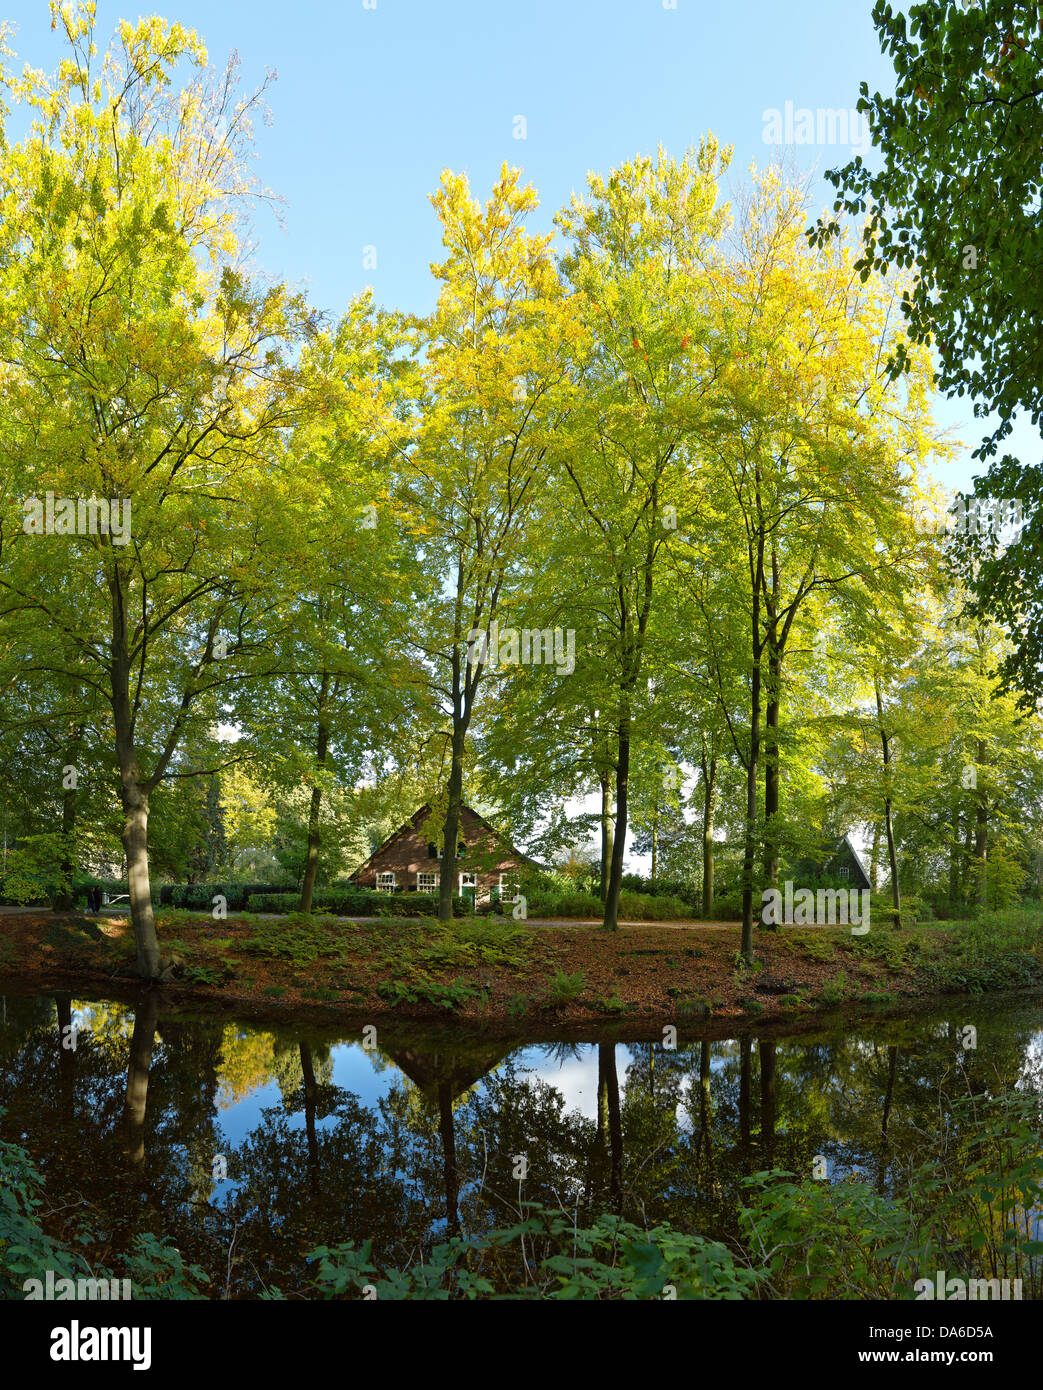 Holland, Netherlands, Europe, ‘s Graveland, Farmhouse, Corverbosch, country estate, farm, water, trees, autumn, reflections, Stock Photo